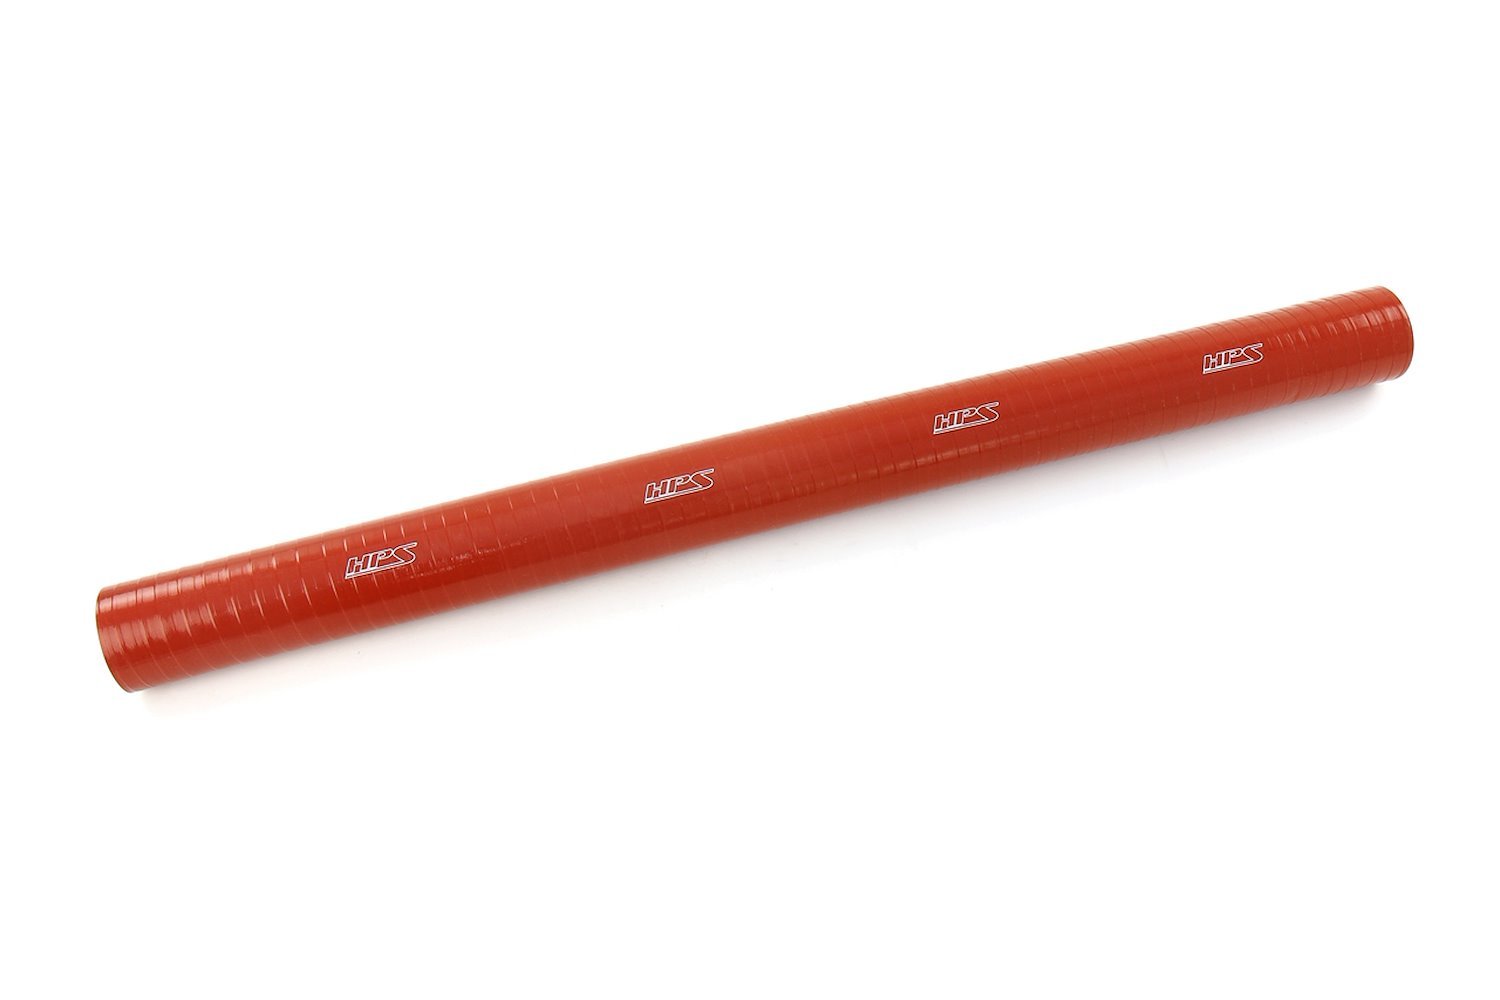 ST-3F-125-HOT Silicone Coolant Tube, Ultra High-Temp 4-Ply Reinforced, 1-1/4 in. ID, 3 ft. Long